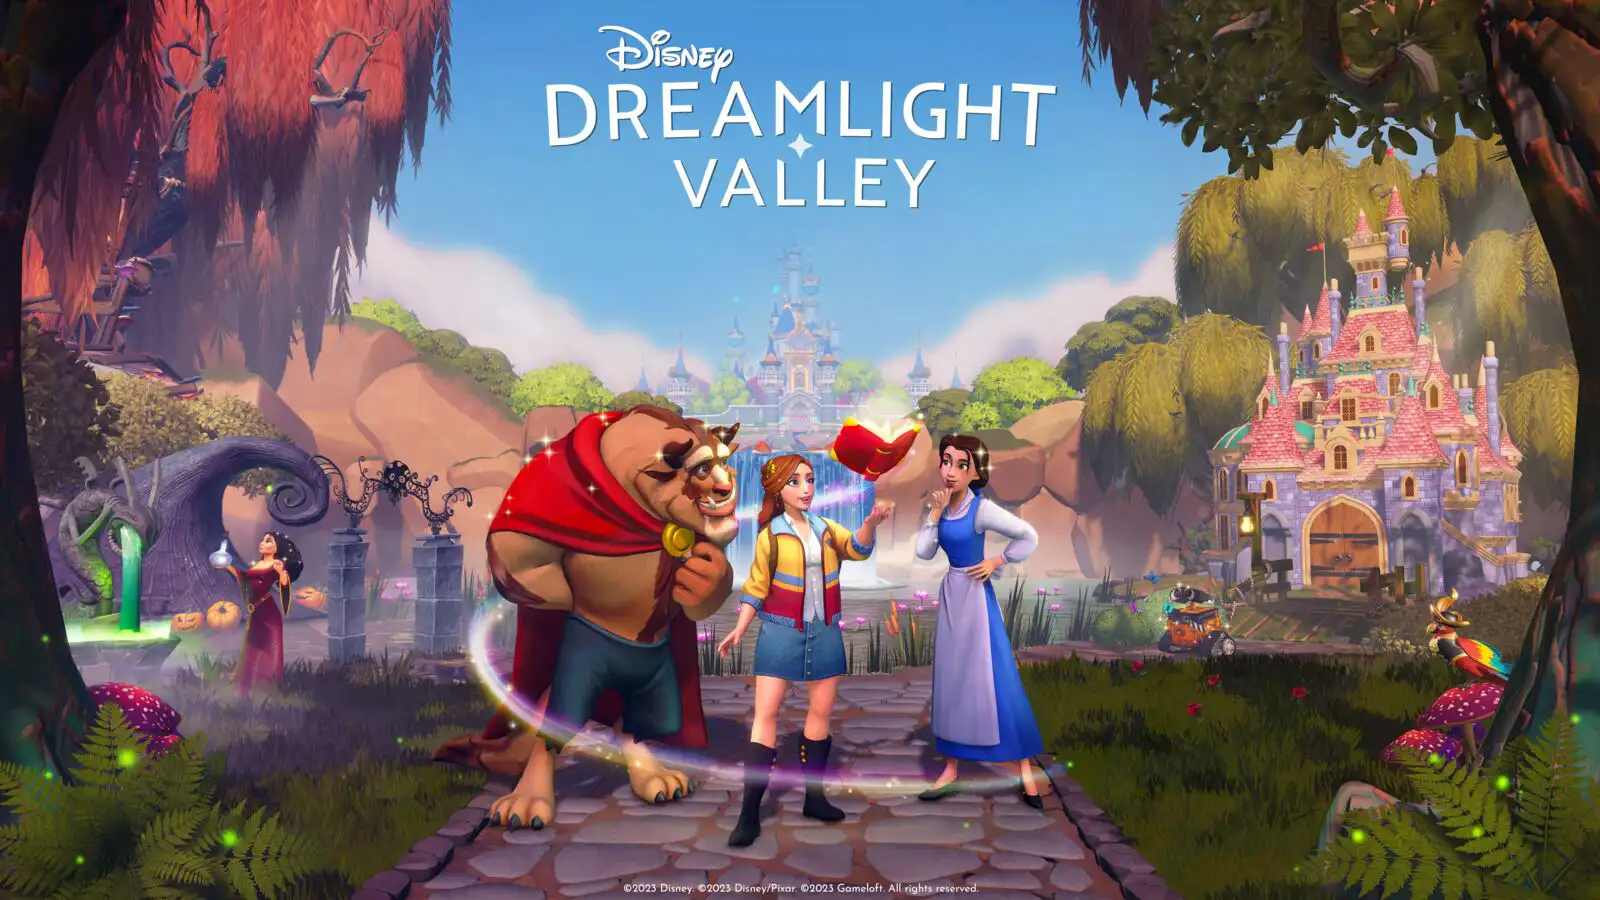 Is Disney Dreamlight Valley free to play?